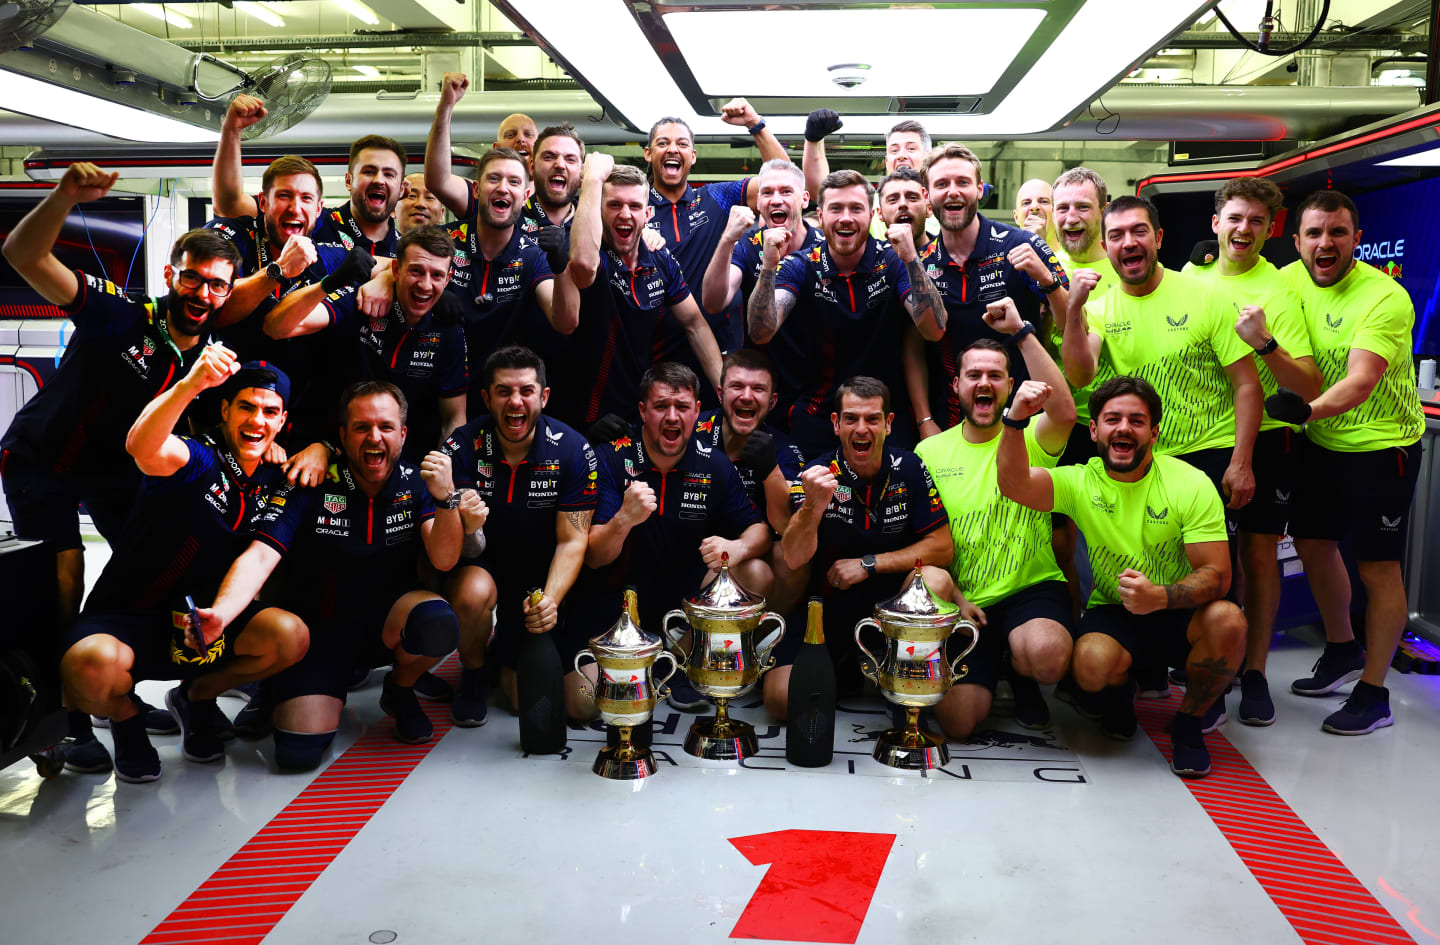 BAHRAIN, BAHRAIN - MARCH 05: The Red Bull Racing team celebrate in the garage after securing a 1-2 finish during the F1 Grand Prix of Bahrain at Bahrain International Circuit on March 05, 2023 in Bahrain, Bahrain. (Photo by Mark Thompson/Getty Images)